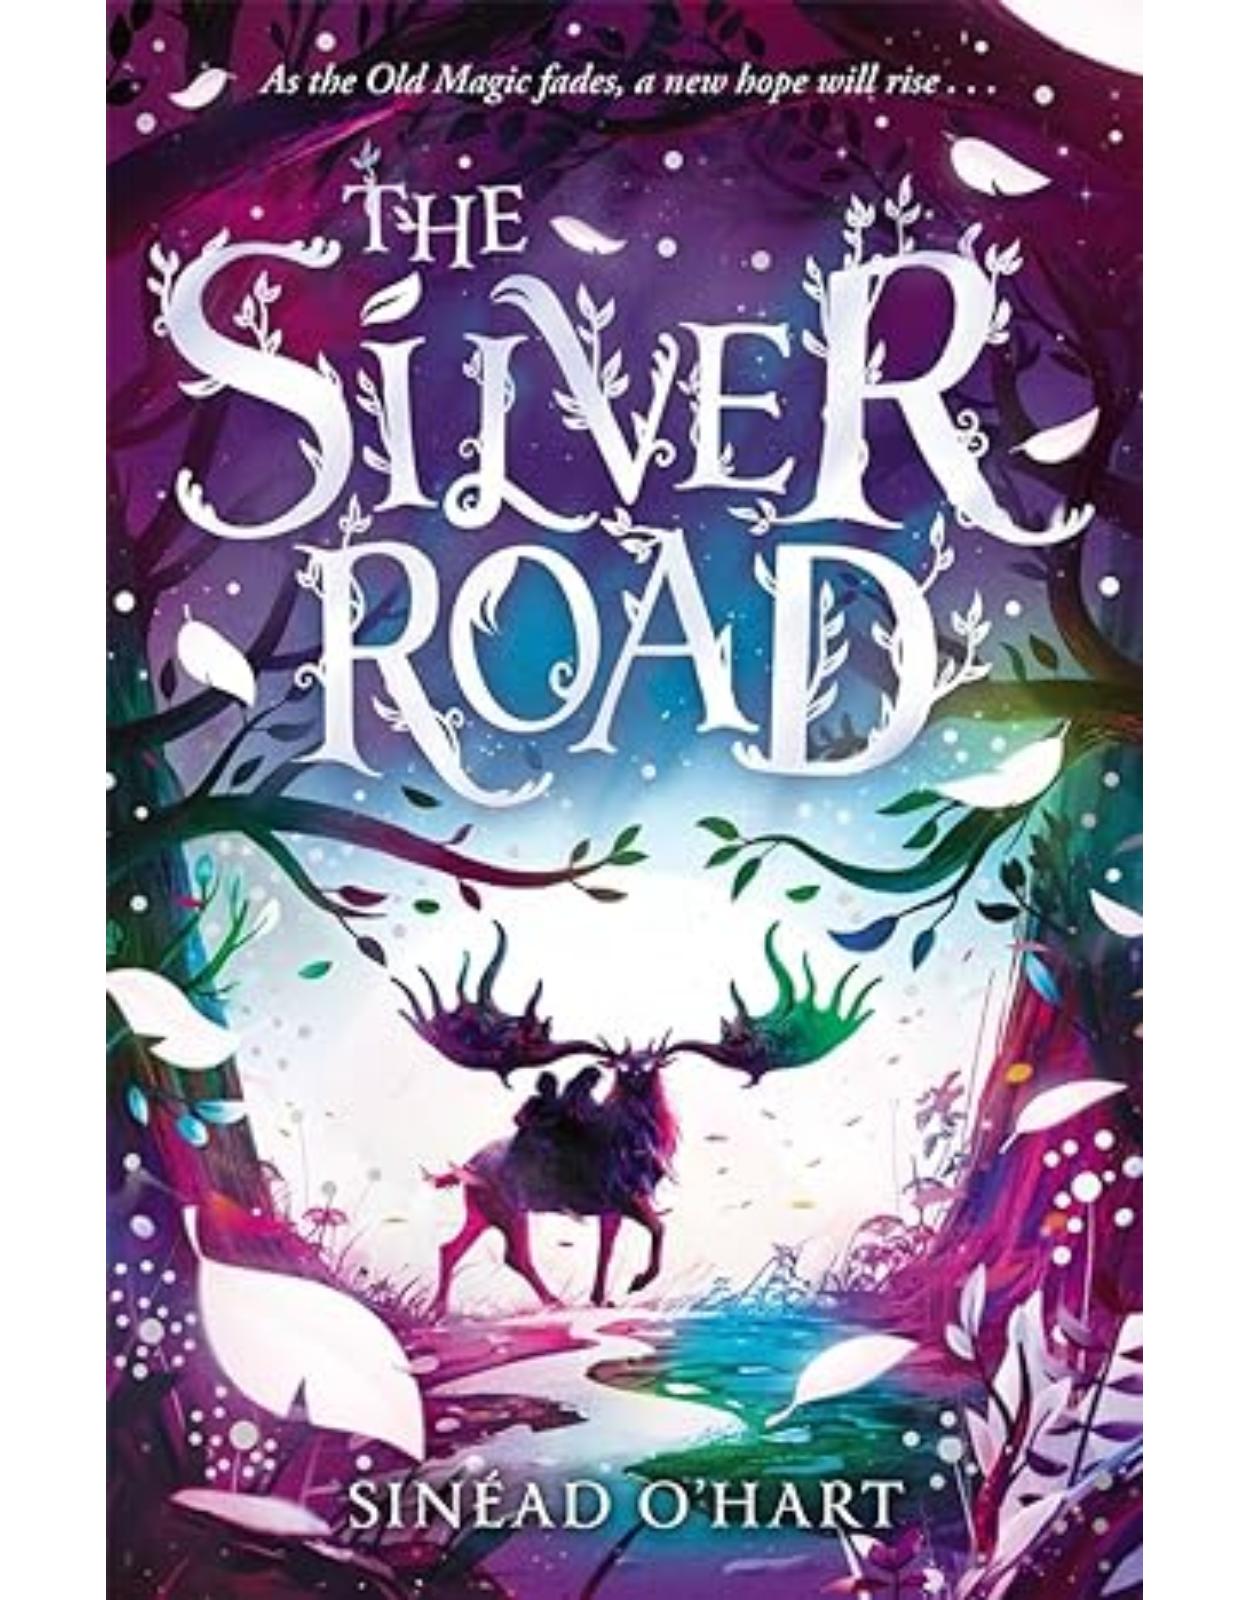 The Silver Road: a thrilling adventure filled with myth and magic